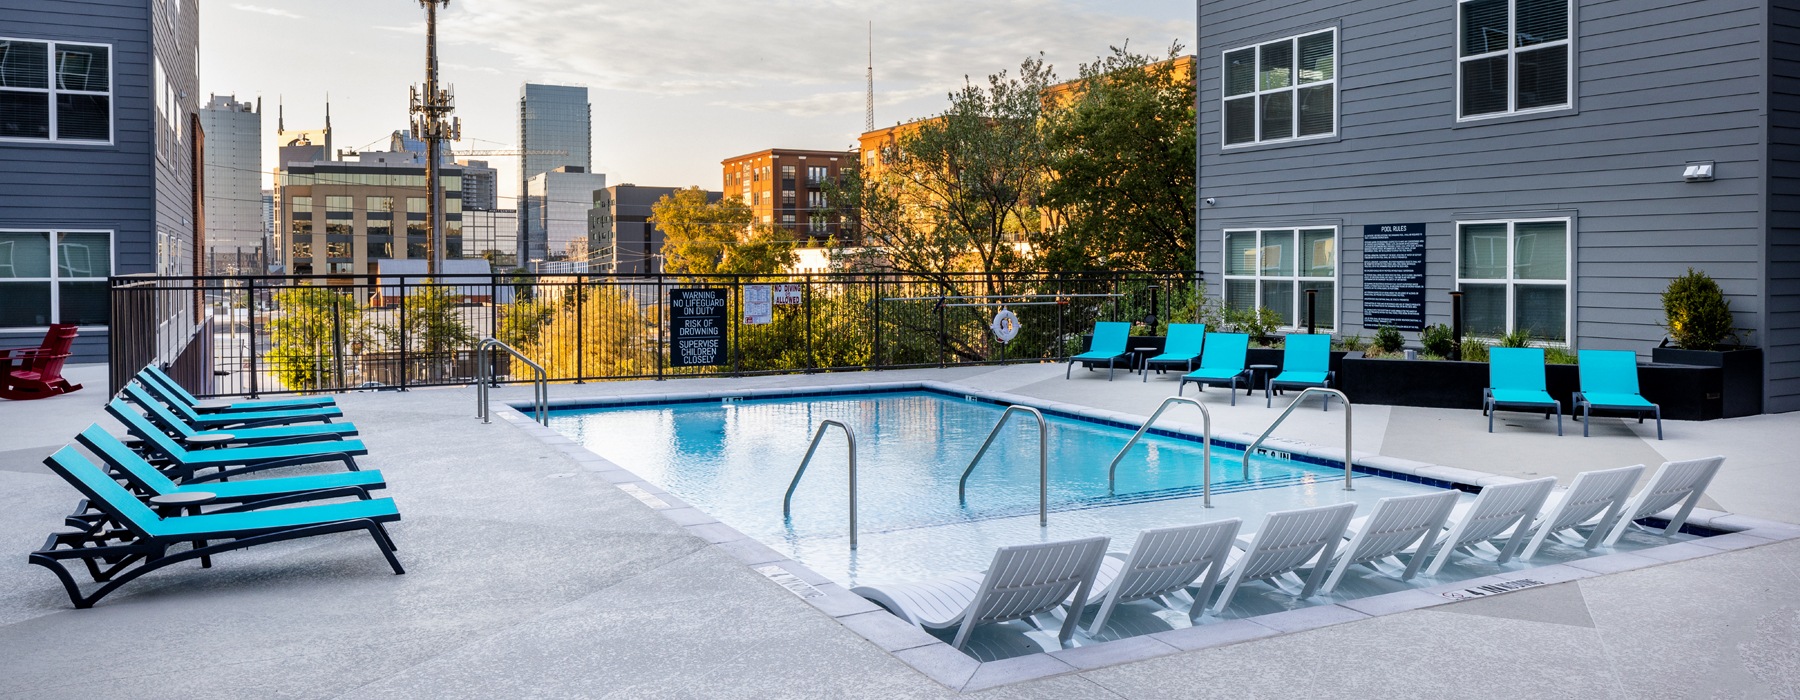 Pool lounge at our apartments for rent in Nashville, TN, featuring beach chairs and a view of the apartments.